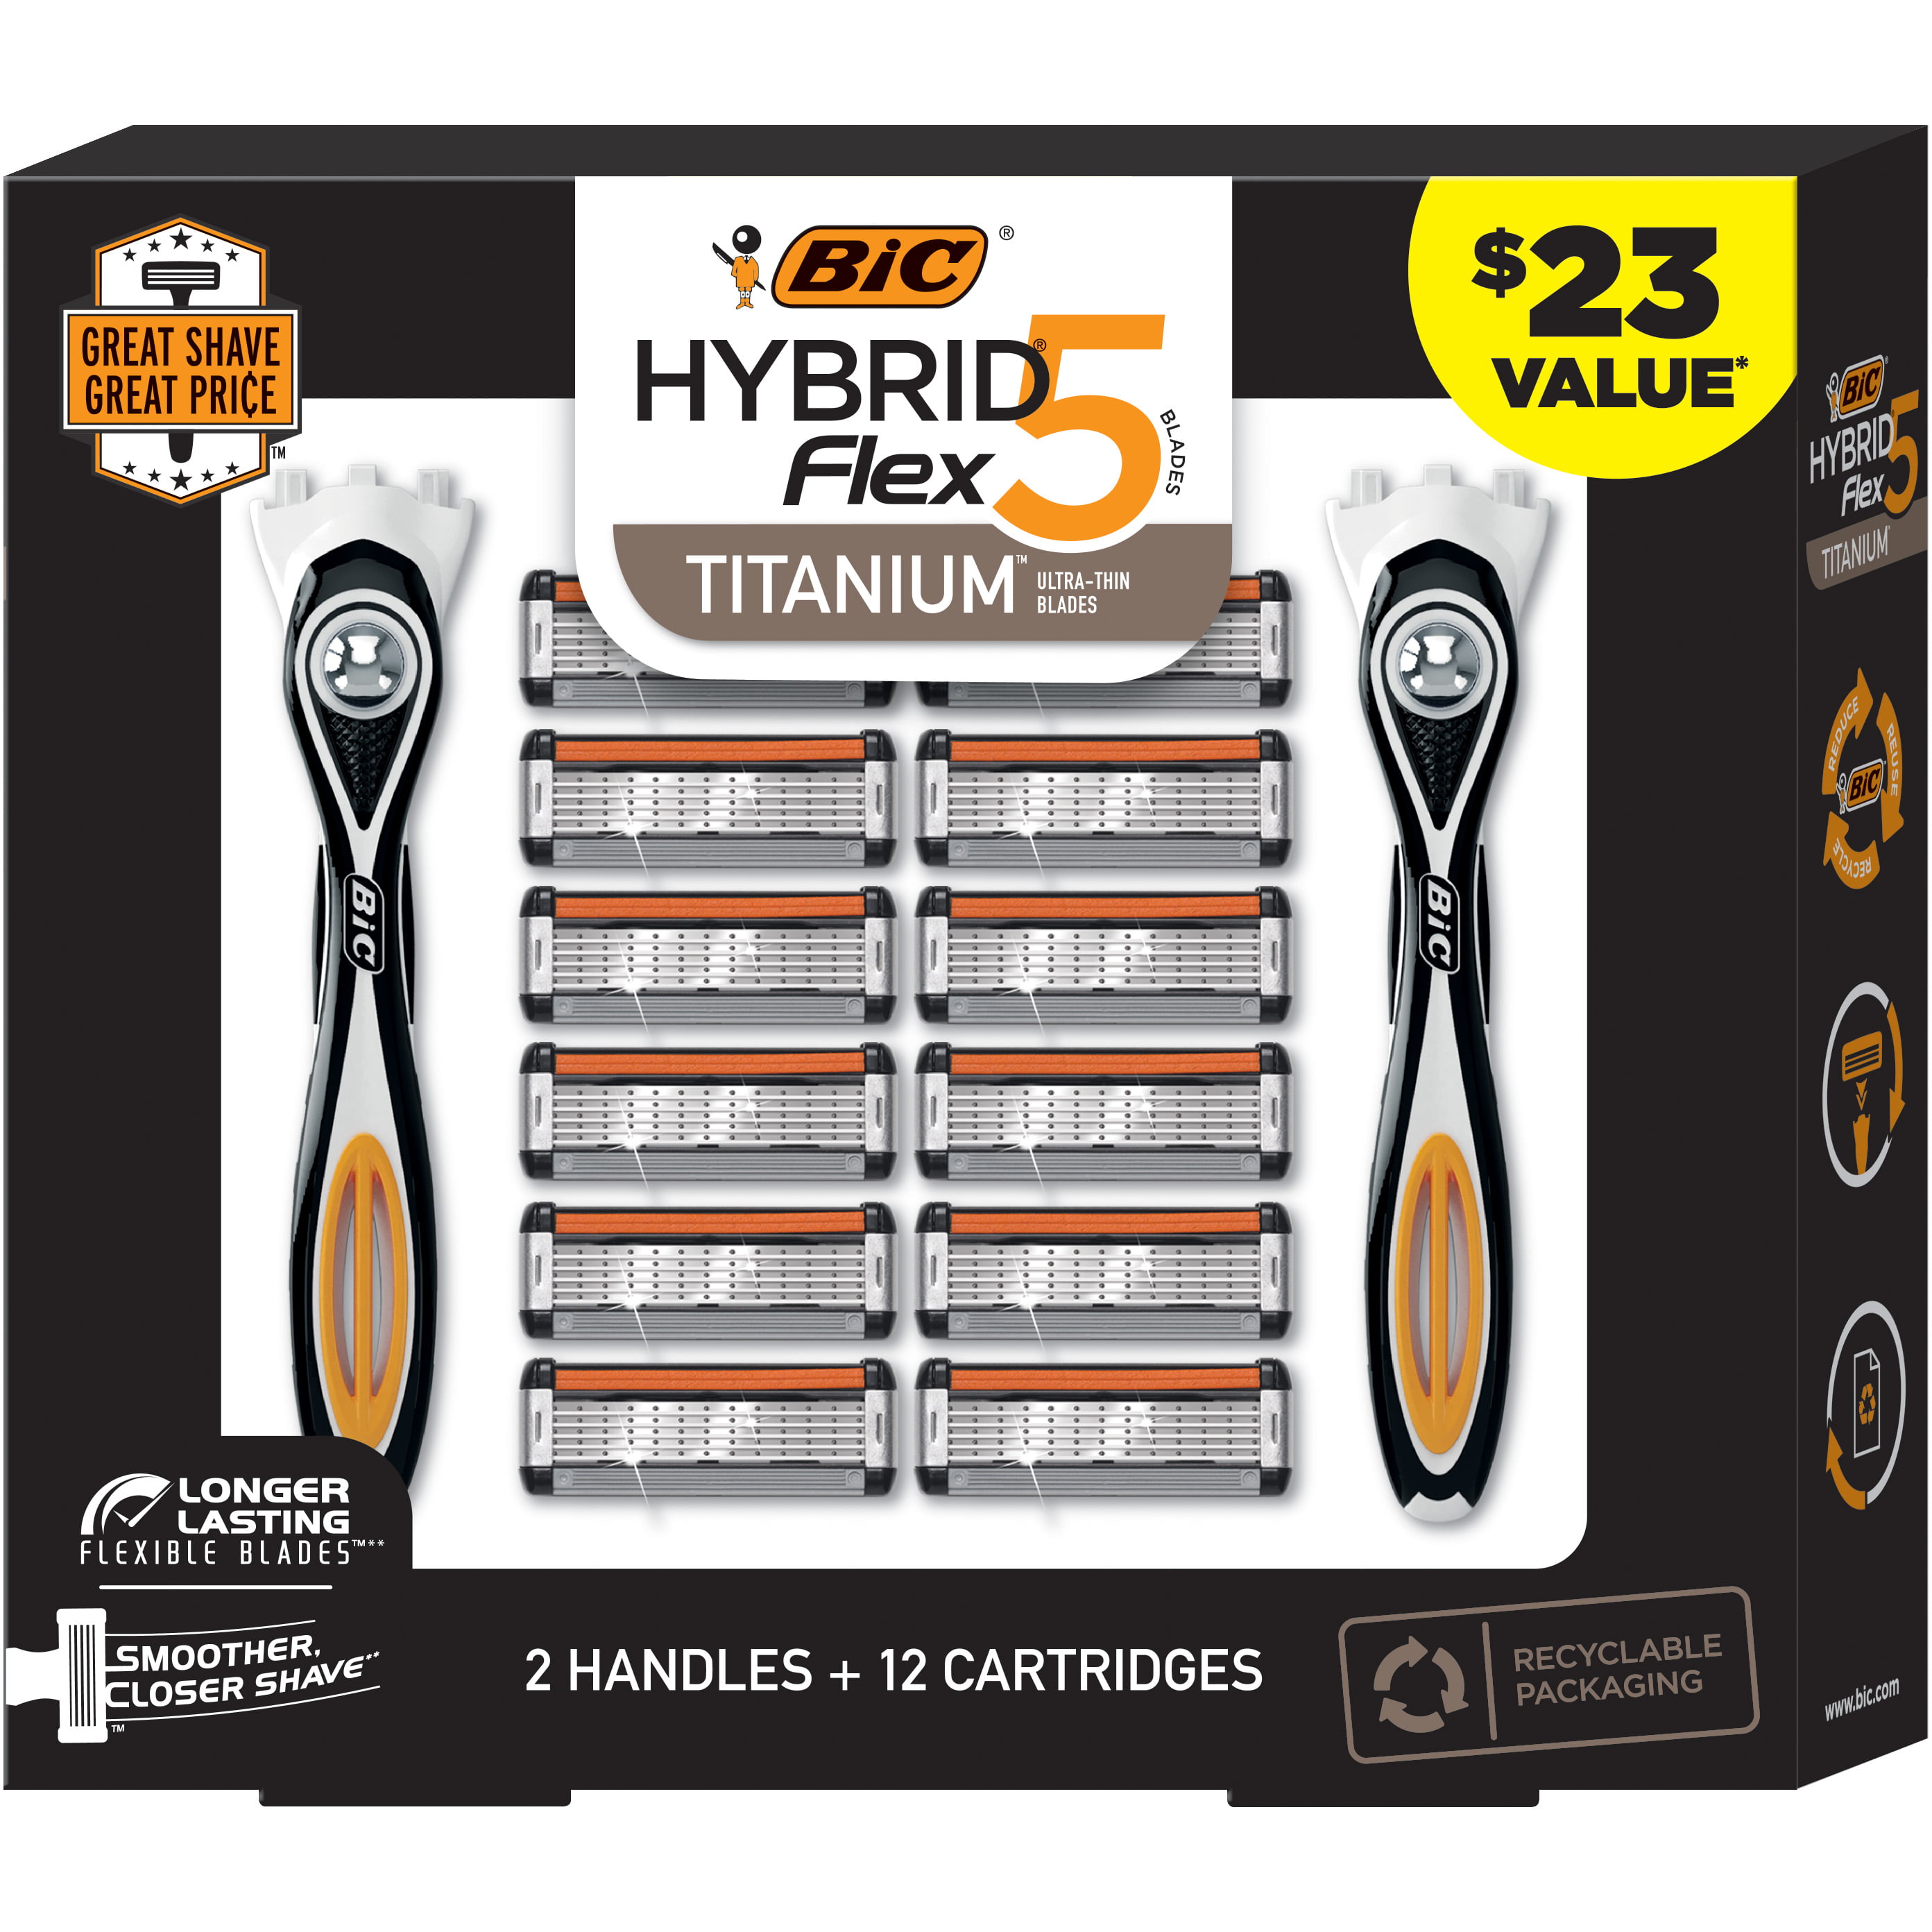 BIC Holiday Gift Set, Hybrid Flex 5, 5 Blade Razors for Men, 2 Handles and 12 Razor Refills, Men's Refillable Razors, Smooth and Close Shave